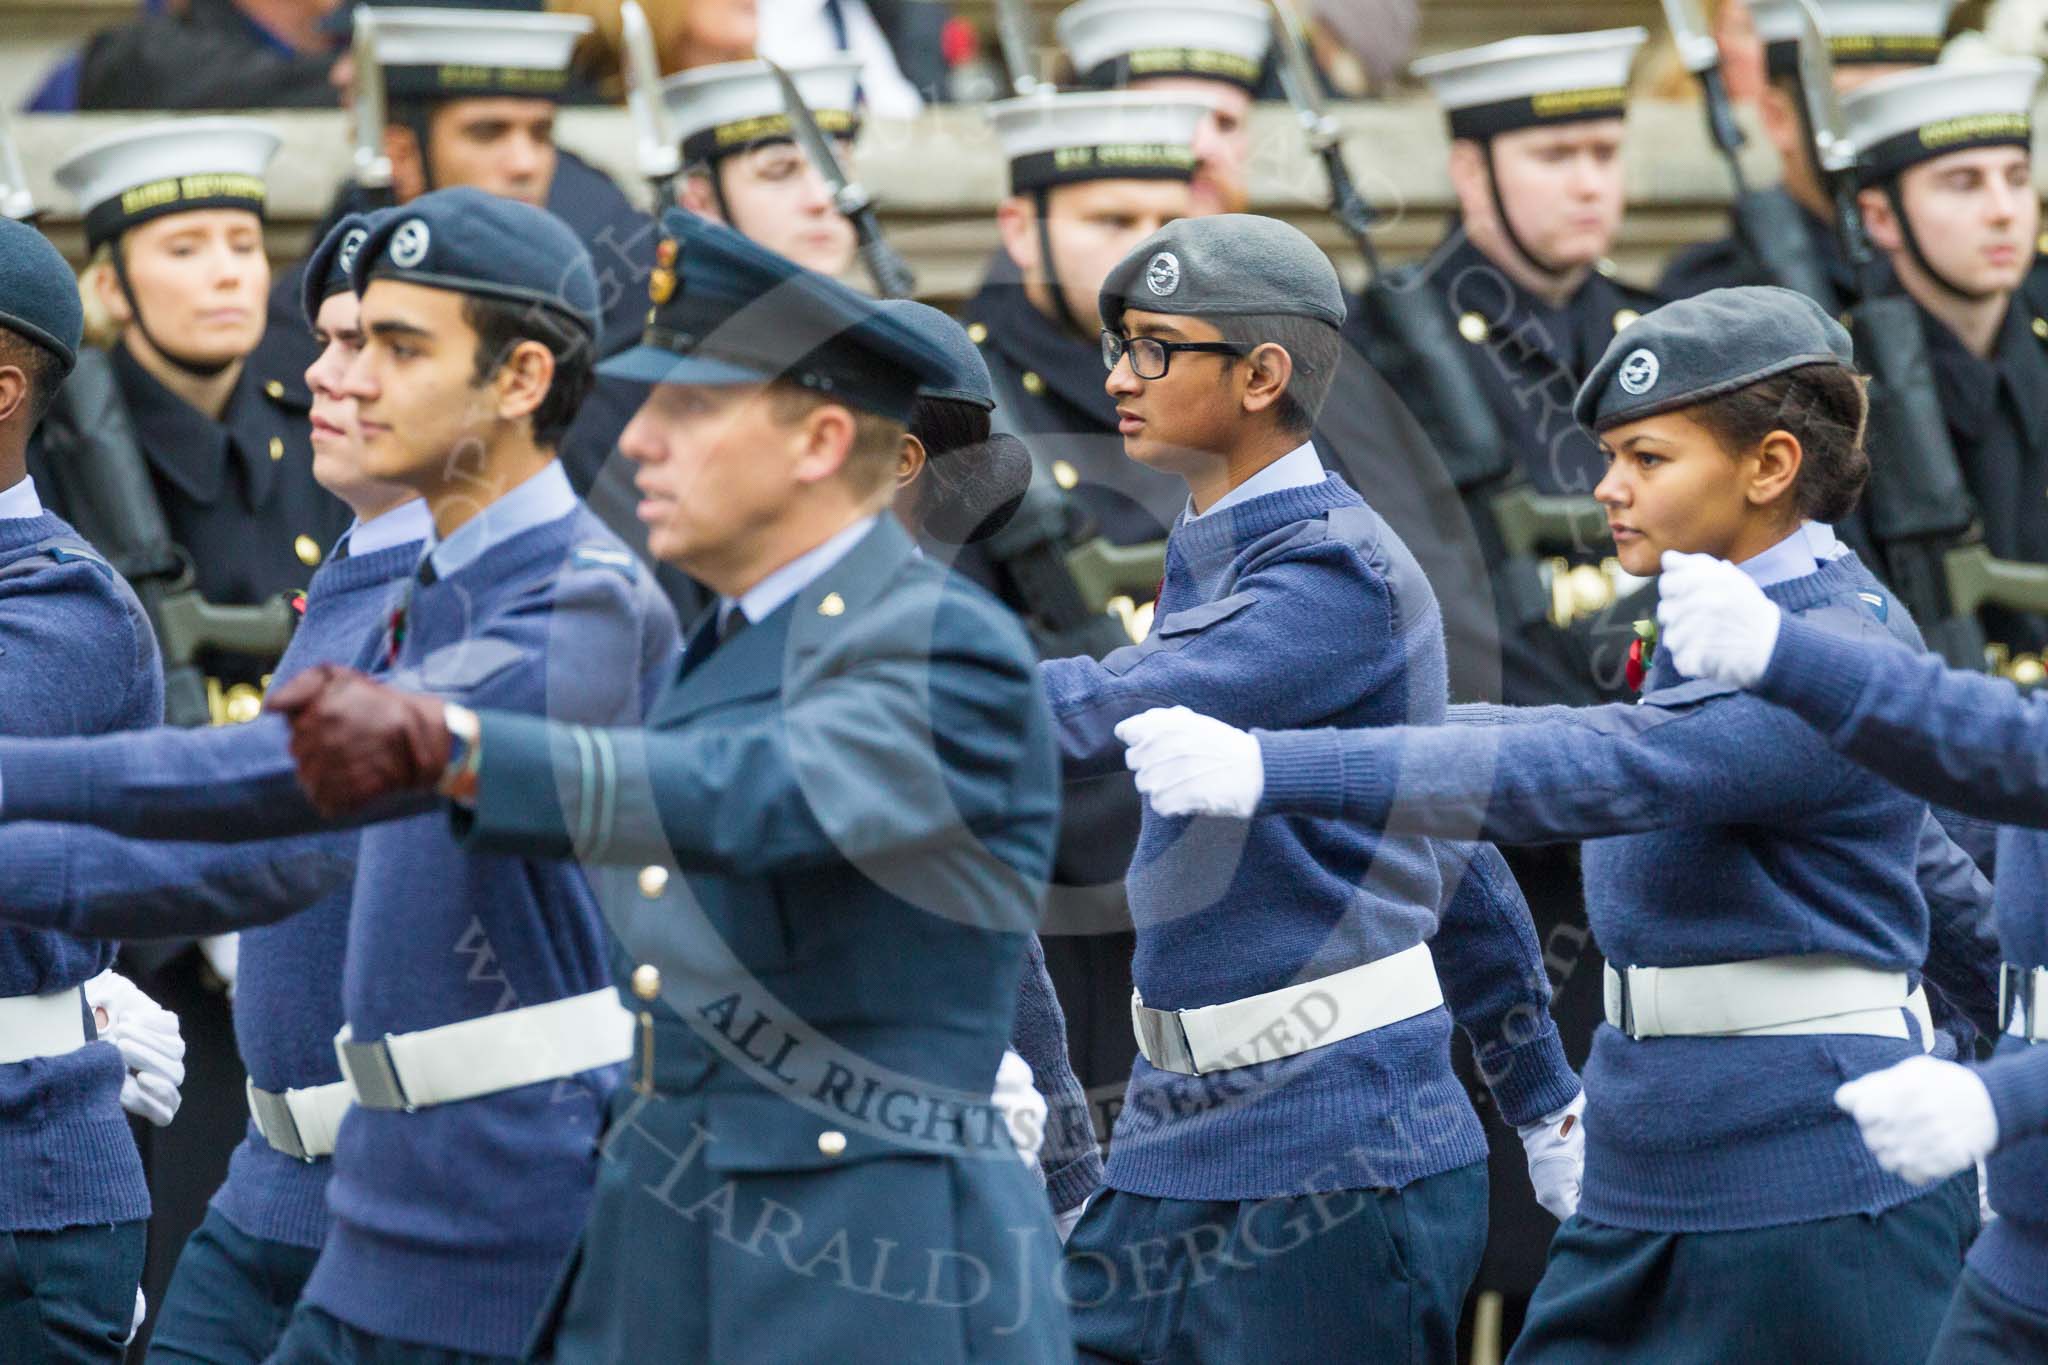 Remembrance Sunday at the Cenotaph 2015: Group M49, Air Training Corps.
Cenotaph, Whitehall, London SW1,
London,
Greater London,
United Kingdom,
on 08 November 2015 at 12:20, image #1713